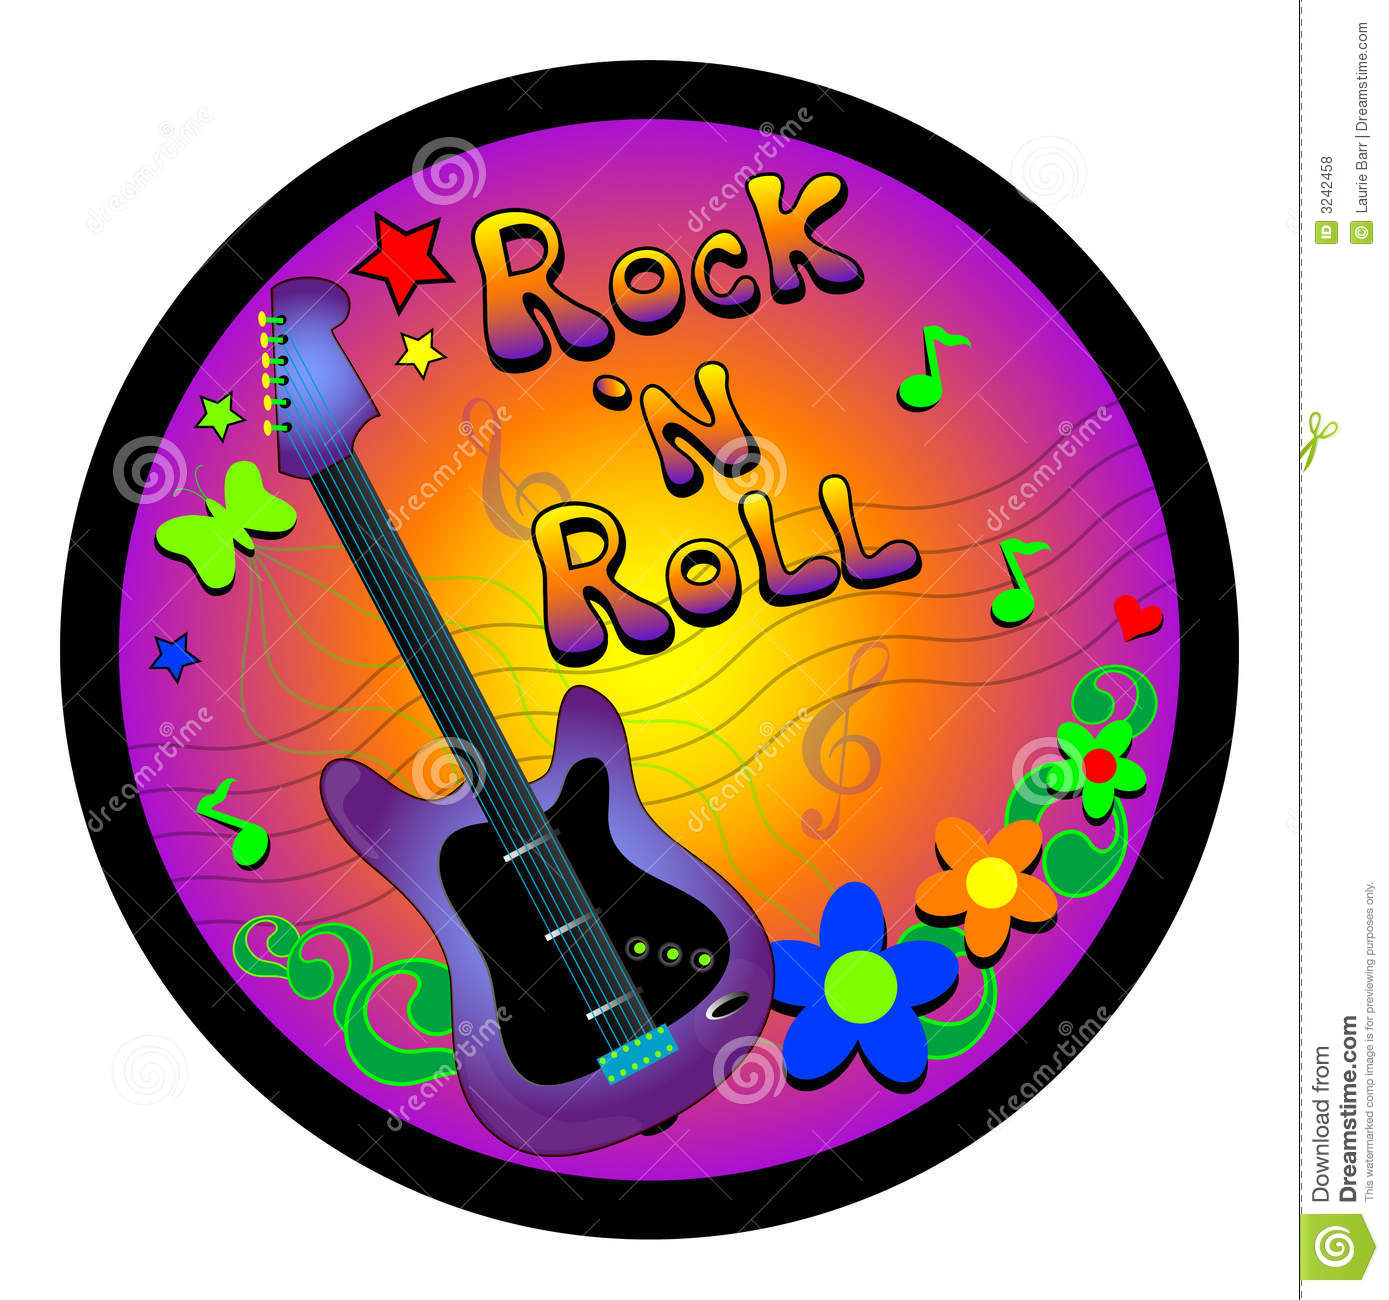 Rock And Roll Graphic Royalty Free Stock Photos   Image  3242458